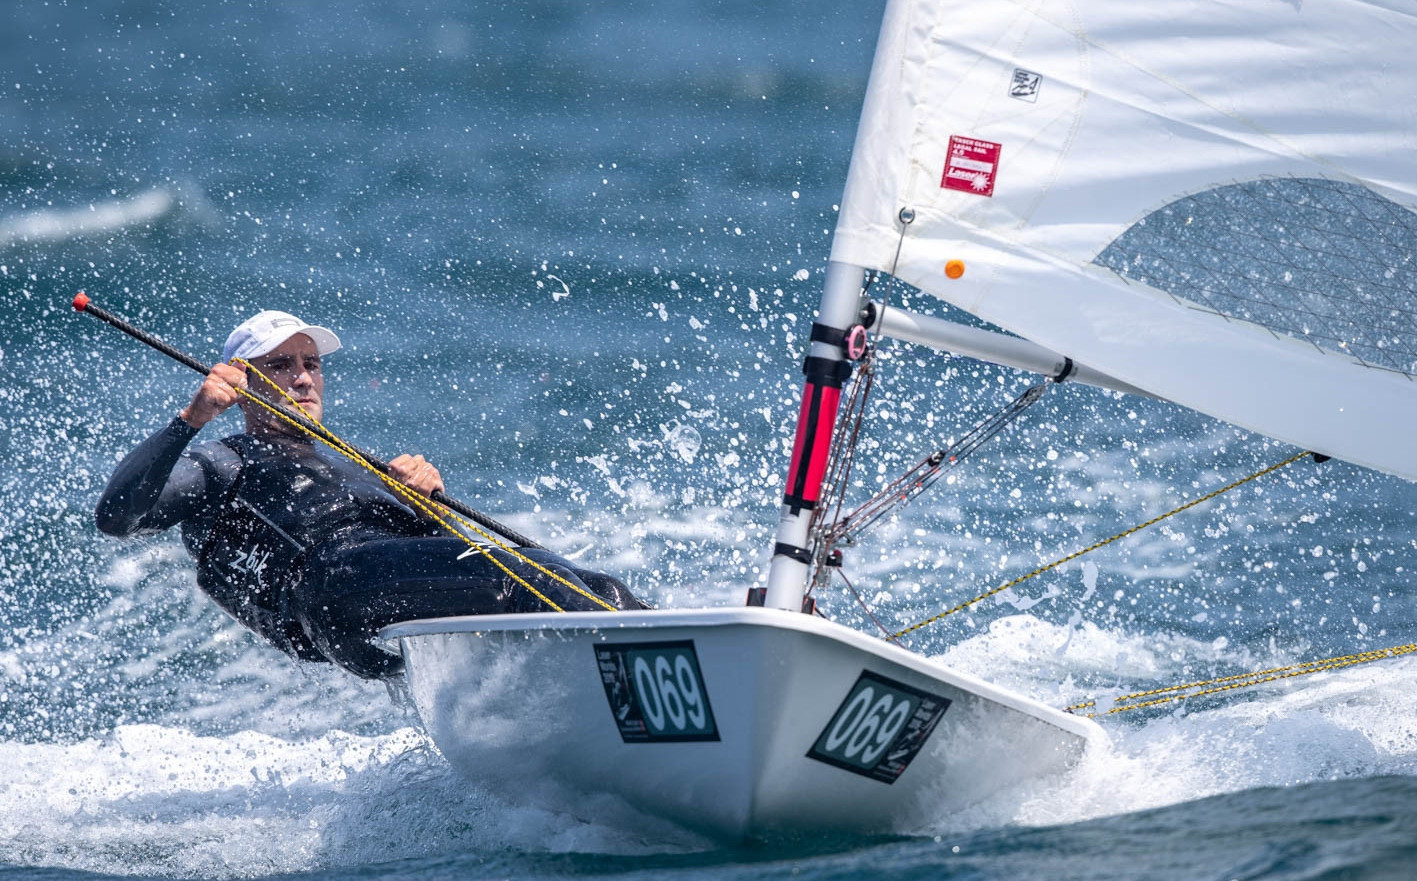 Two wins out of two on the final day of qualification racing at the Laser Men's World Championship in Japan left New Zealand's Sam Meech top of the listings ahead of the medal matches ©Junichi Hirai / Bulkhead Magazine Japan